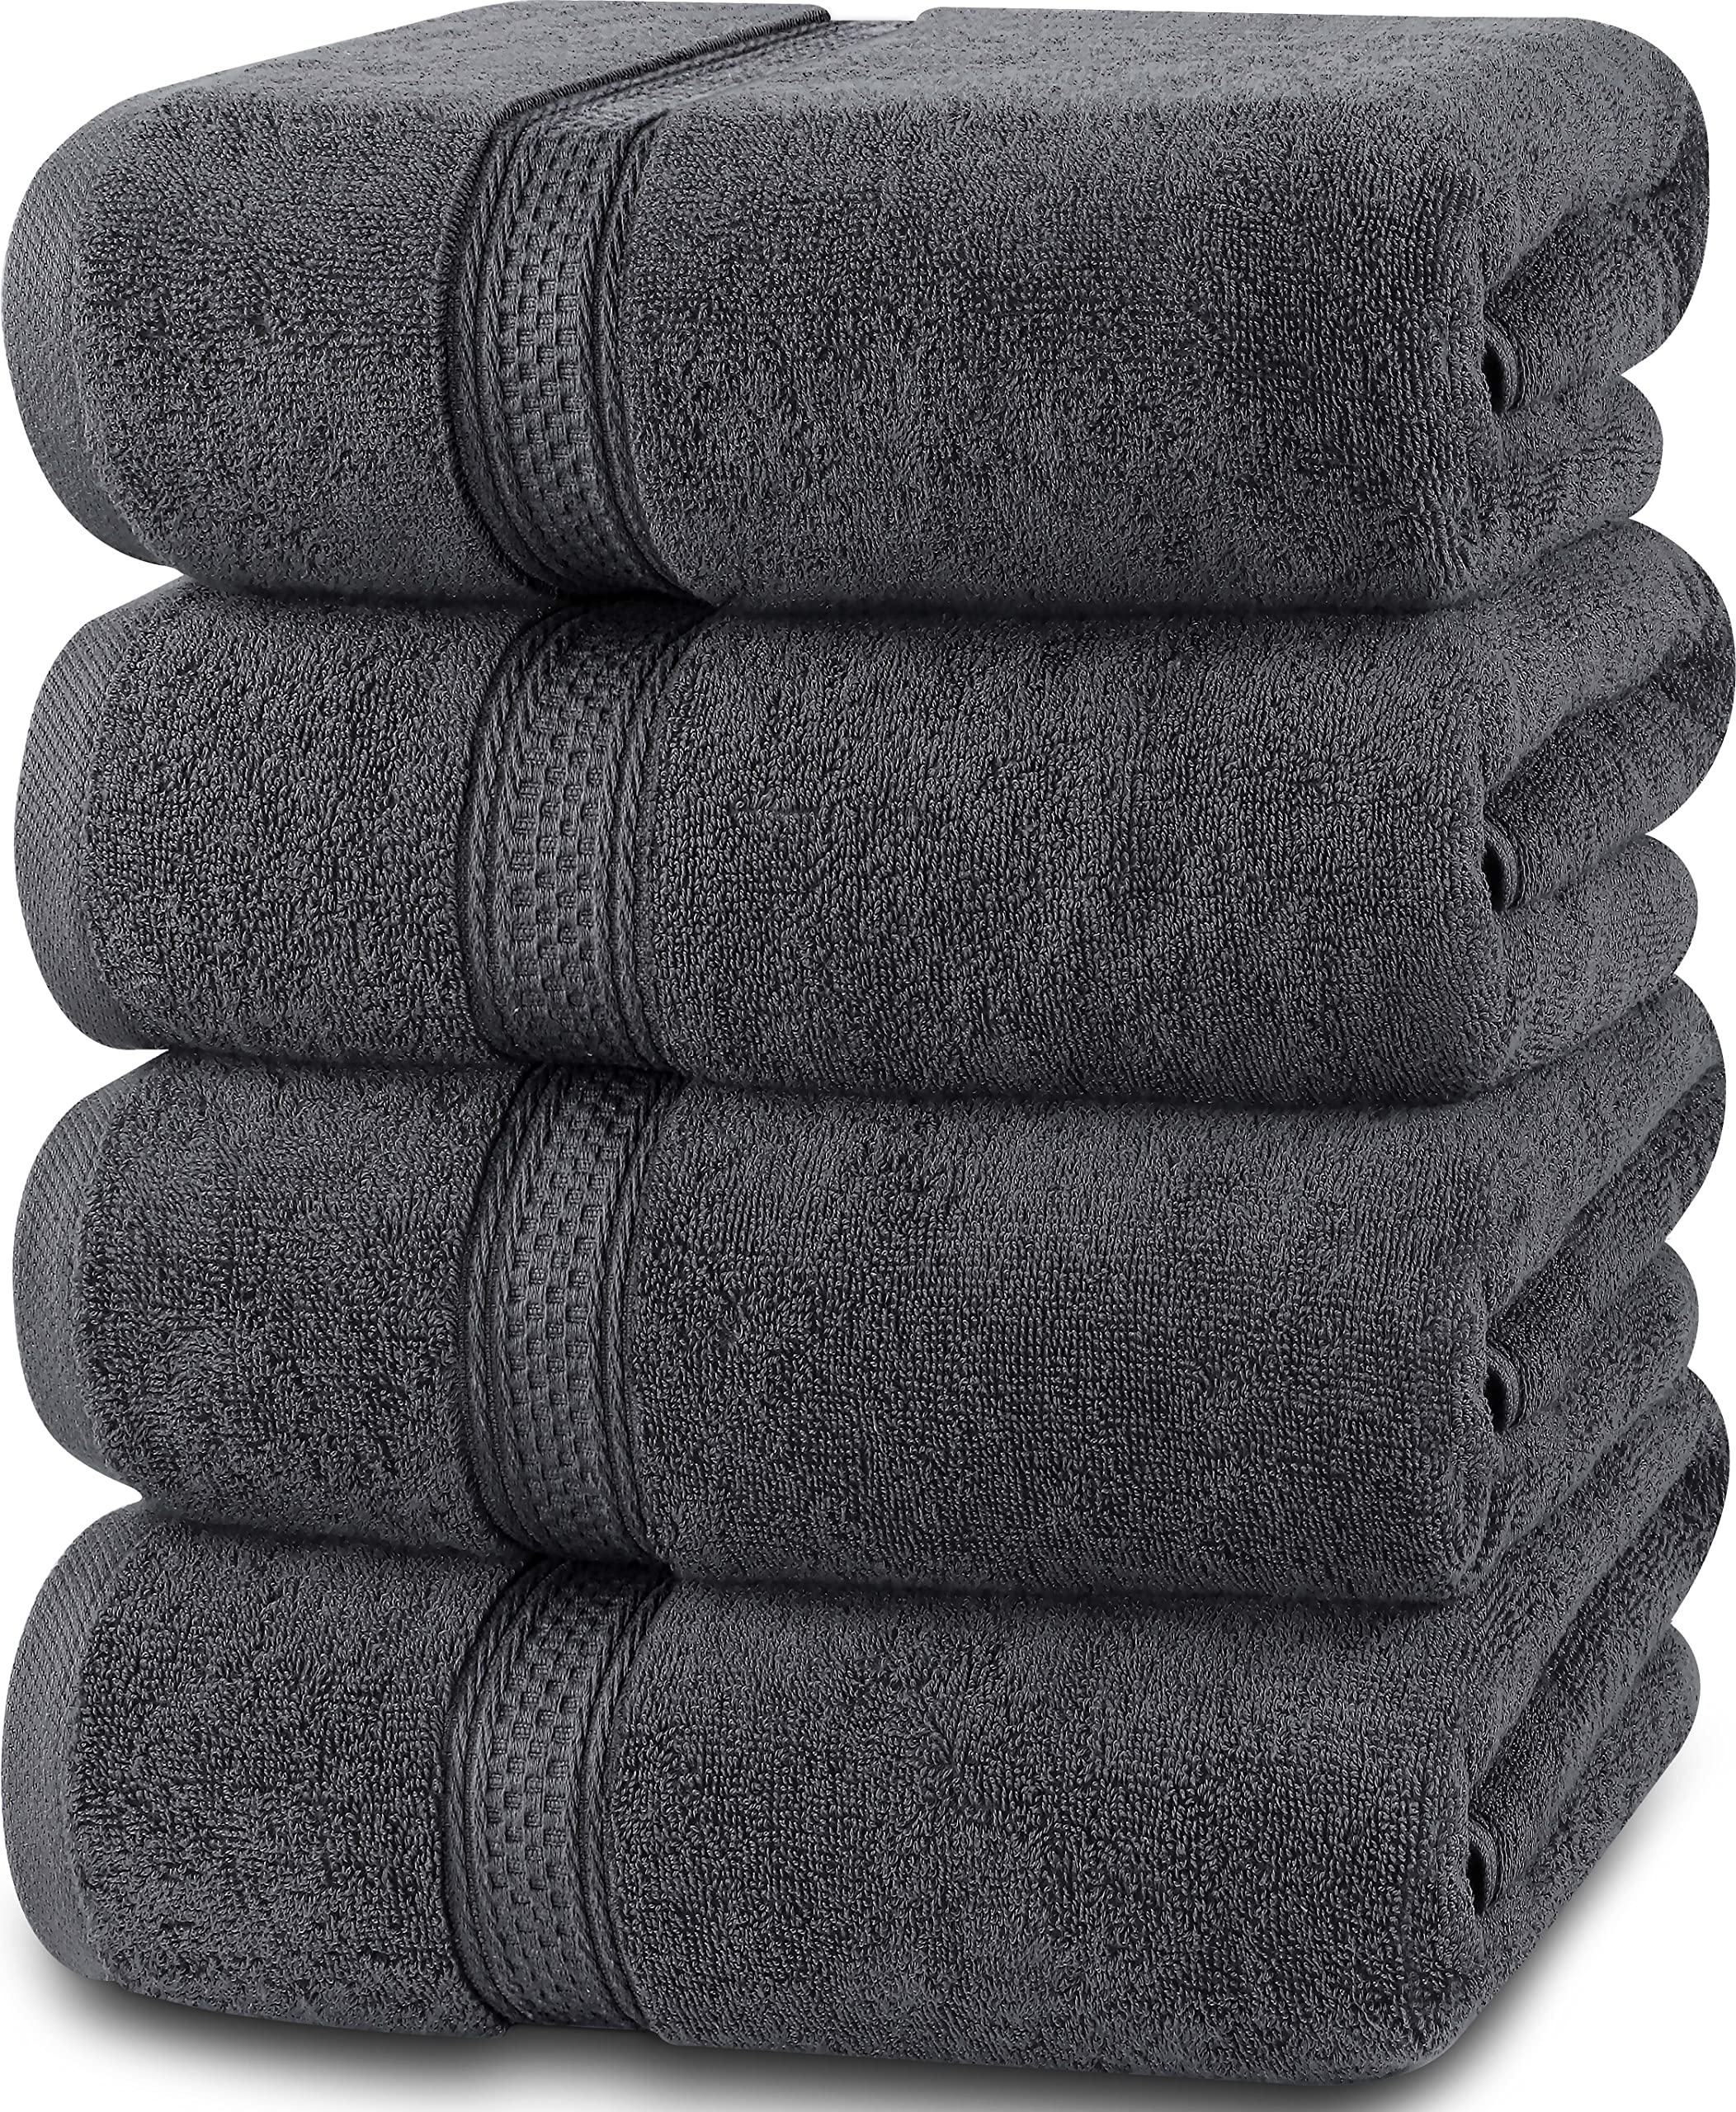 Utopia Towels - Premium Jumbo Bath Sheet 2 Pack - 100% Cotton Highly  Absorbent and Quick Dry Extra Large Bath Towel - Super Soft Hotel Quality  Towel